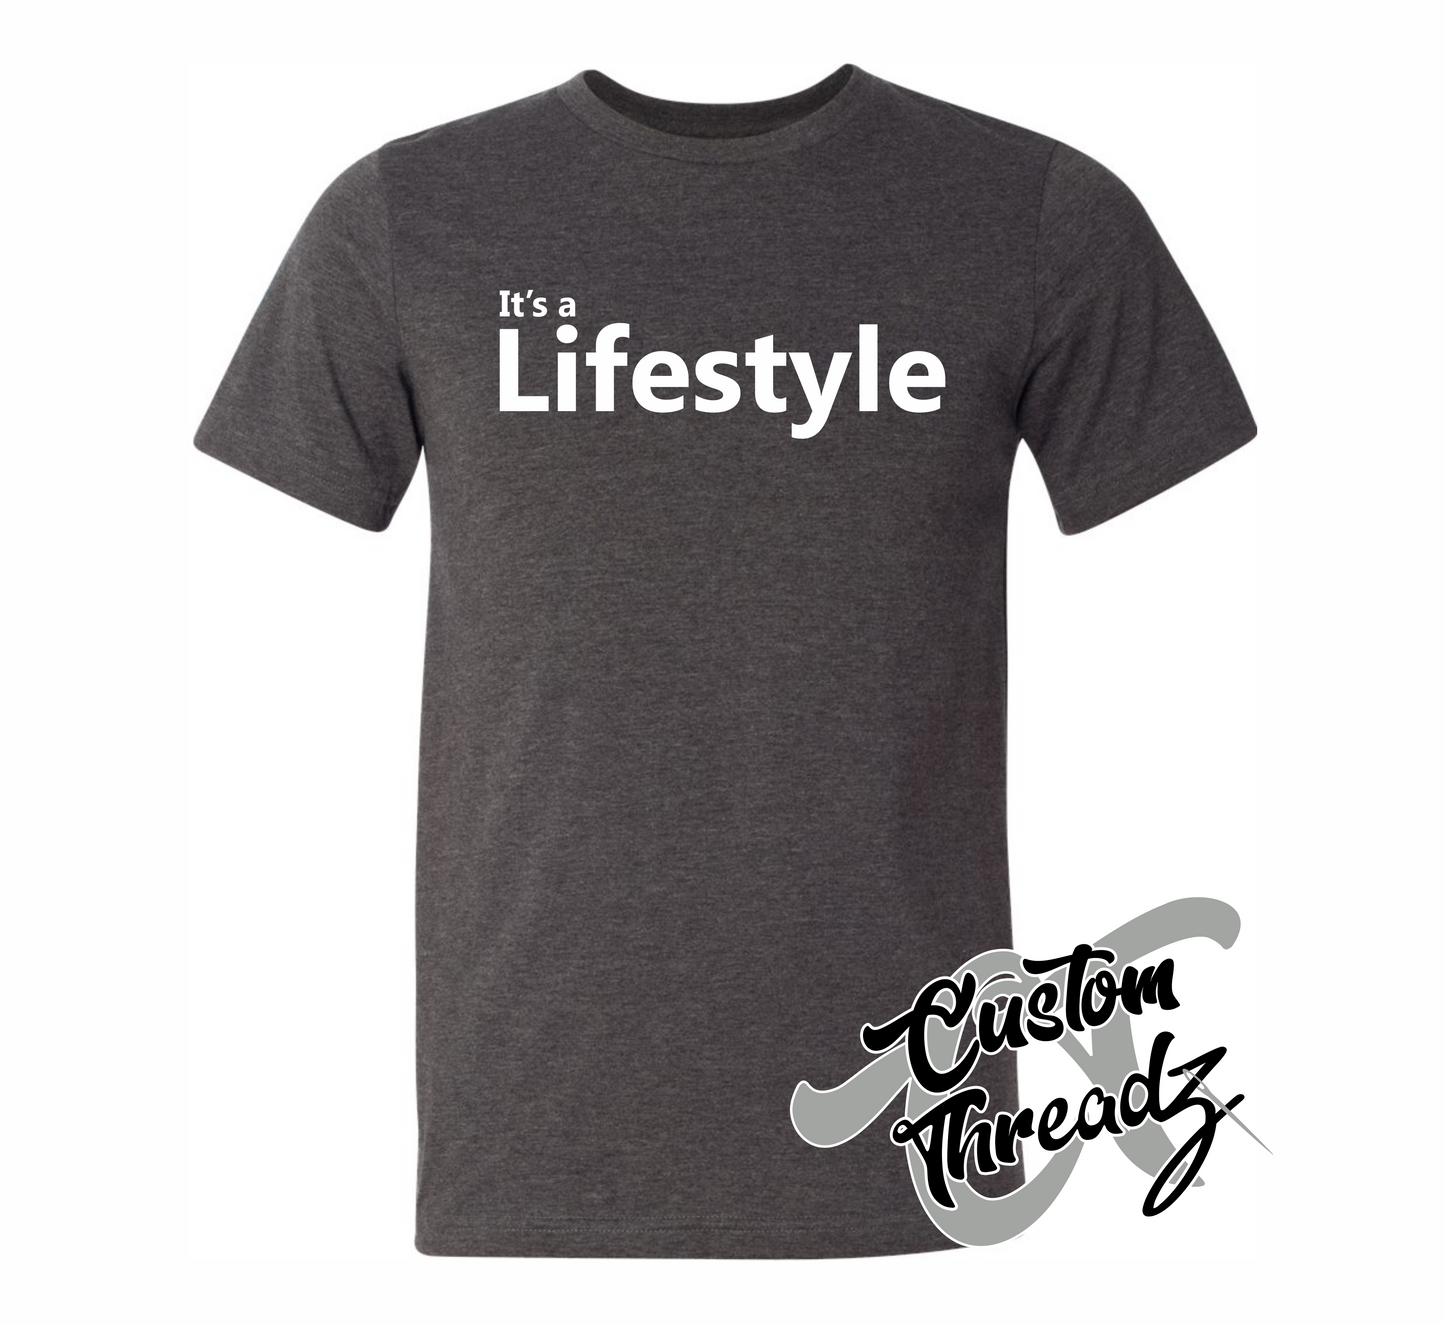 dark grey heather tee with its a lifestyle DTG printed design